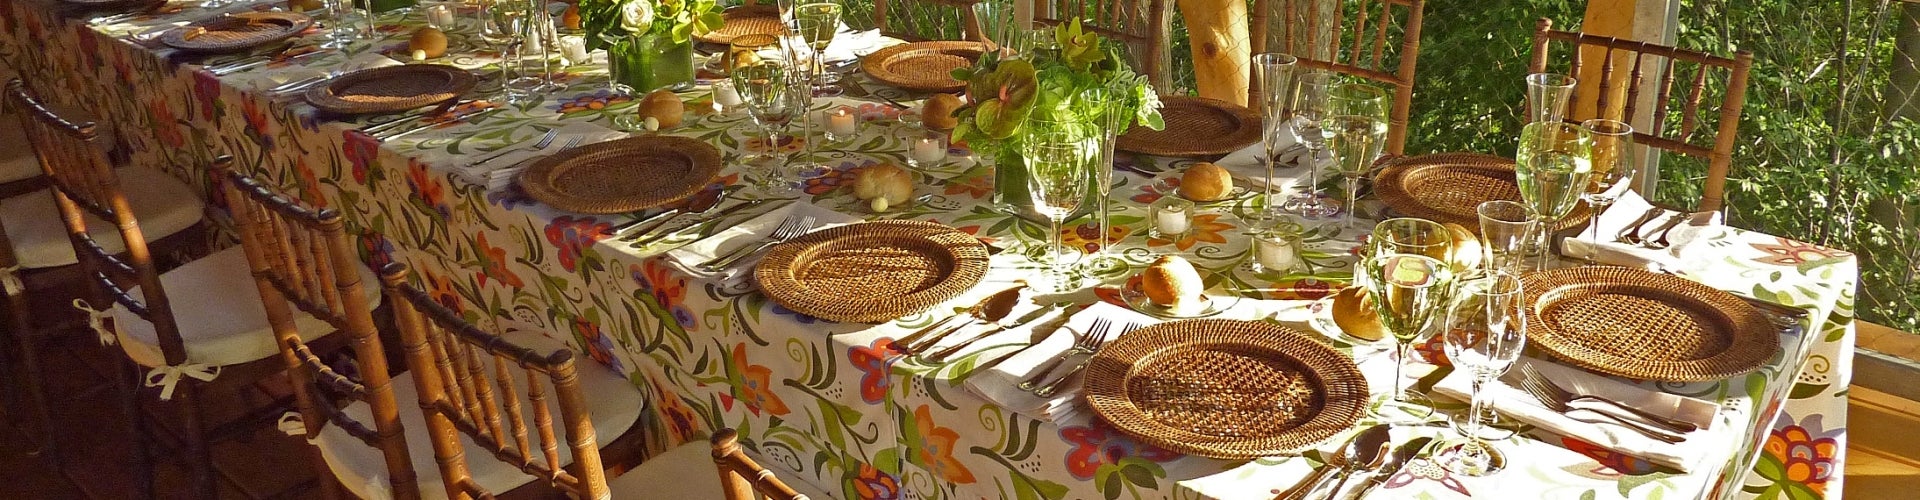 A decorated table with flowers and place settings.